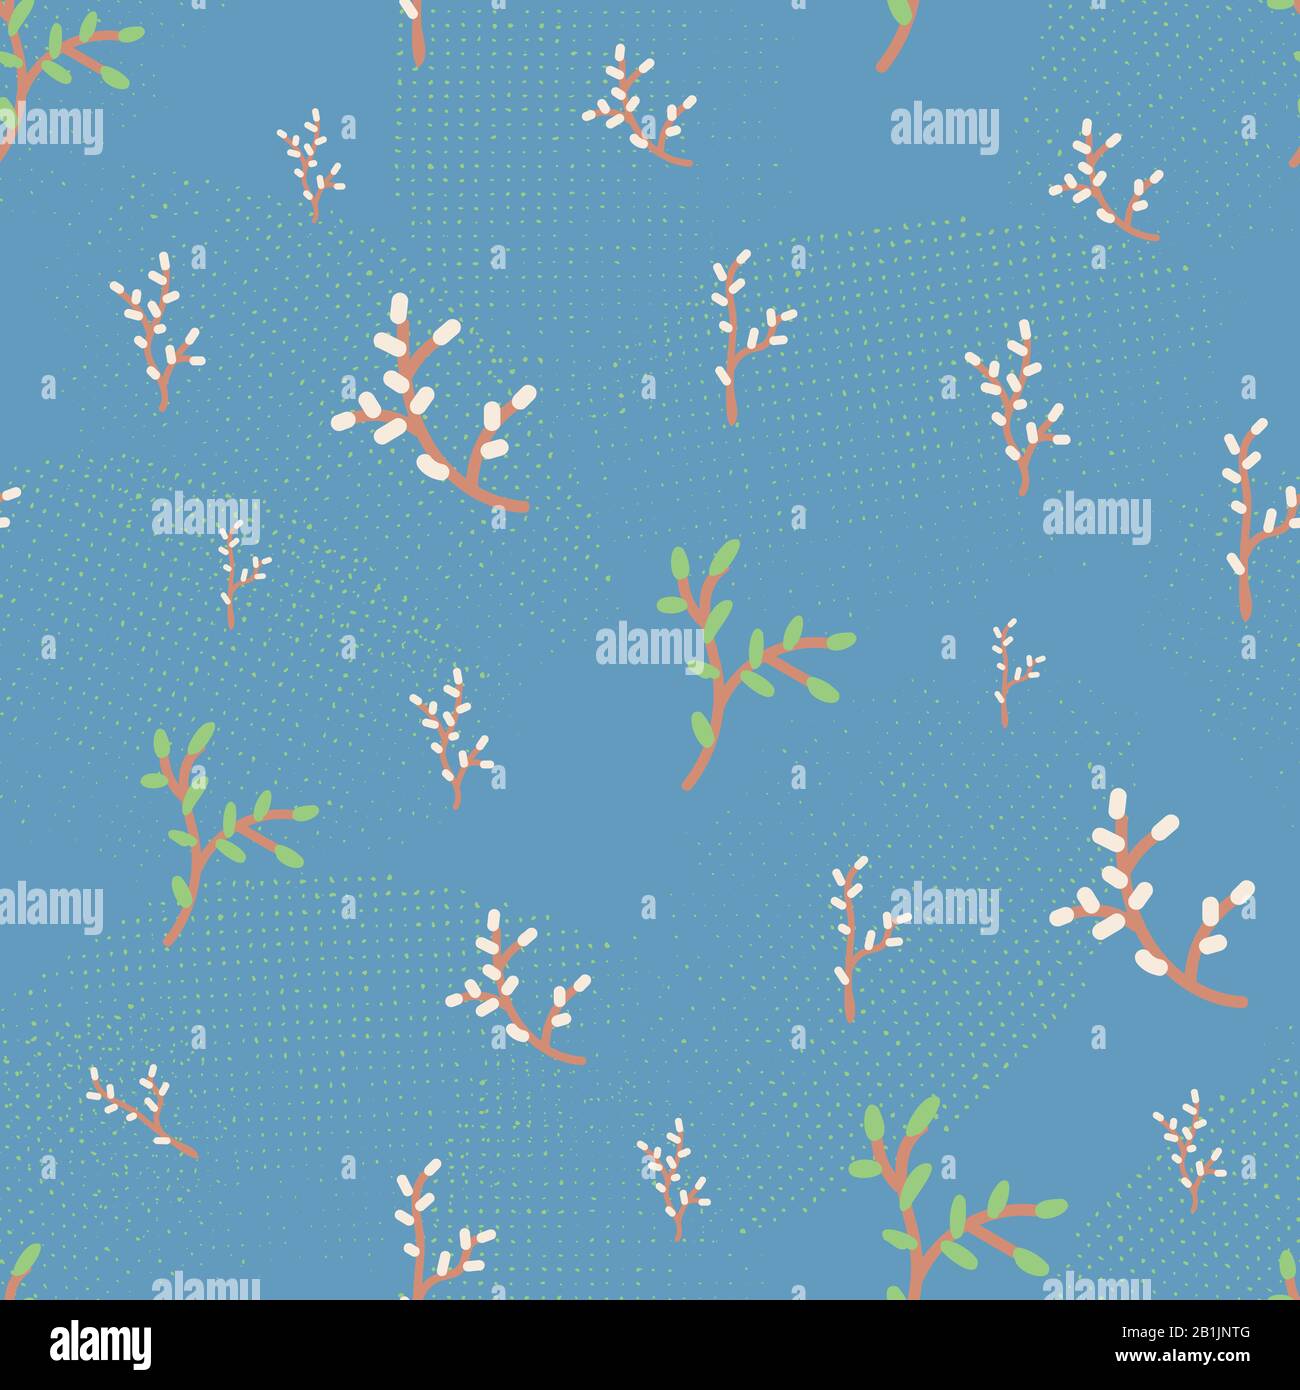 spring tree branches with catkins and young budding leaves seamless vector patten on a blue background Stock Vector